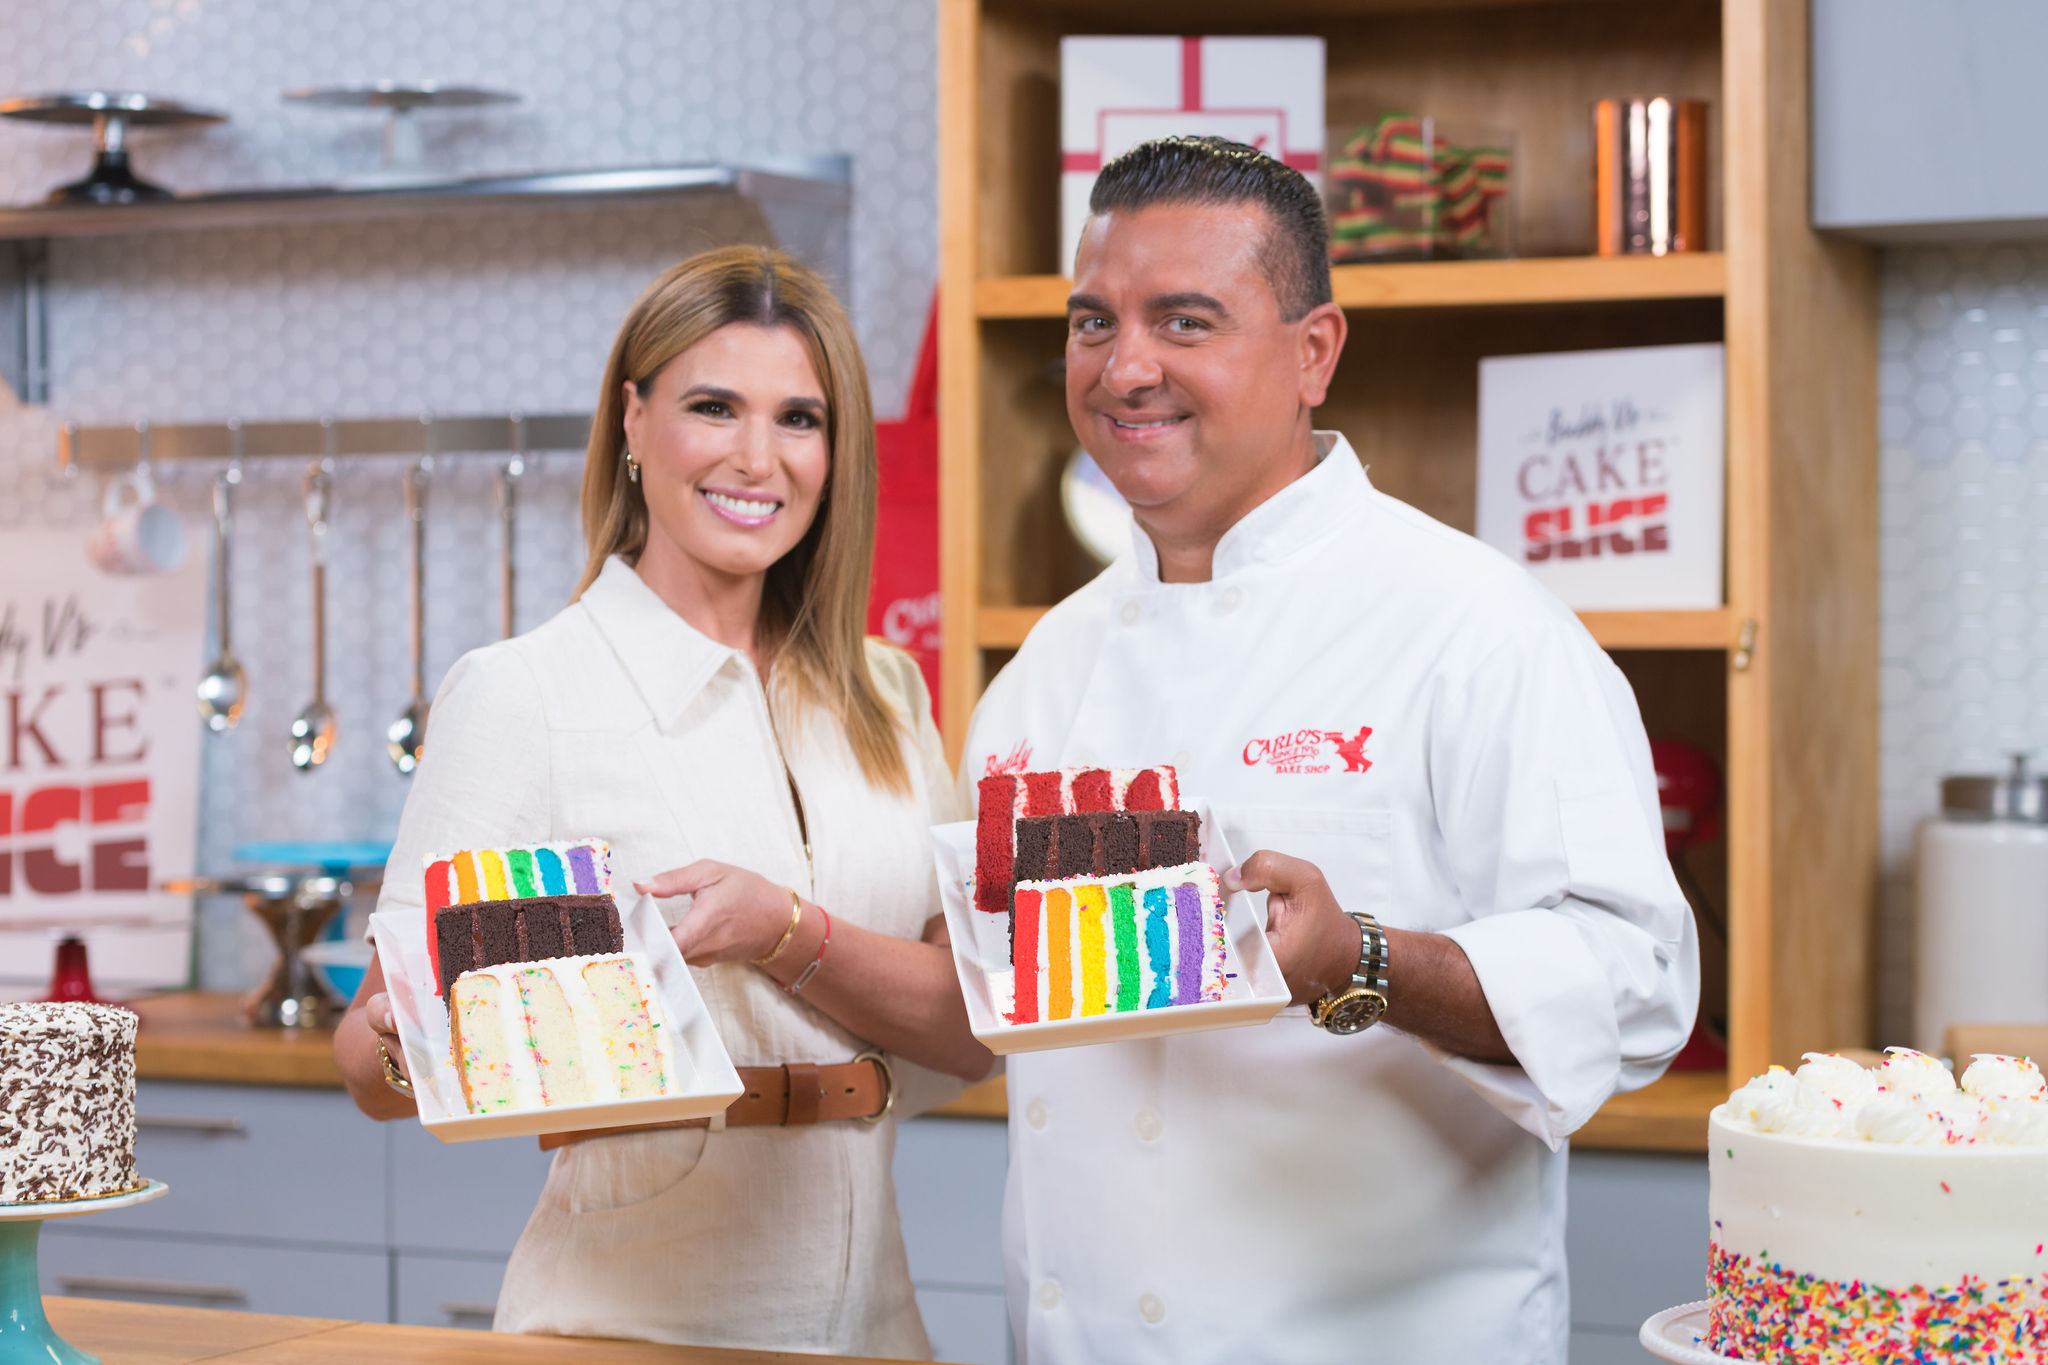 24 Buddy The Cake Boss Valastro Signs Copies Of Baking Cake With The Boss  Photos & High Res Pictures - Getty Images